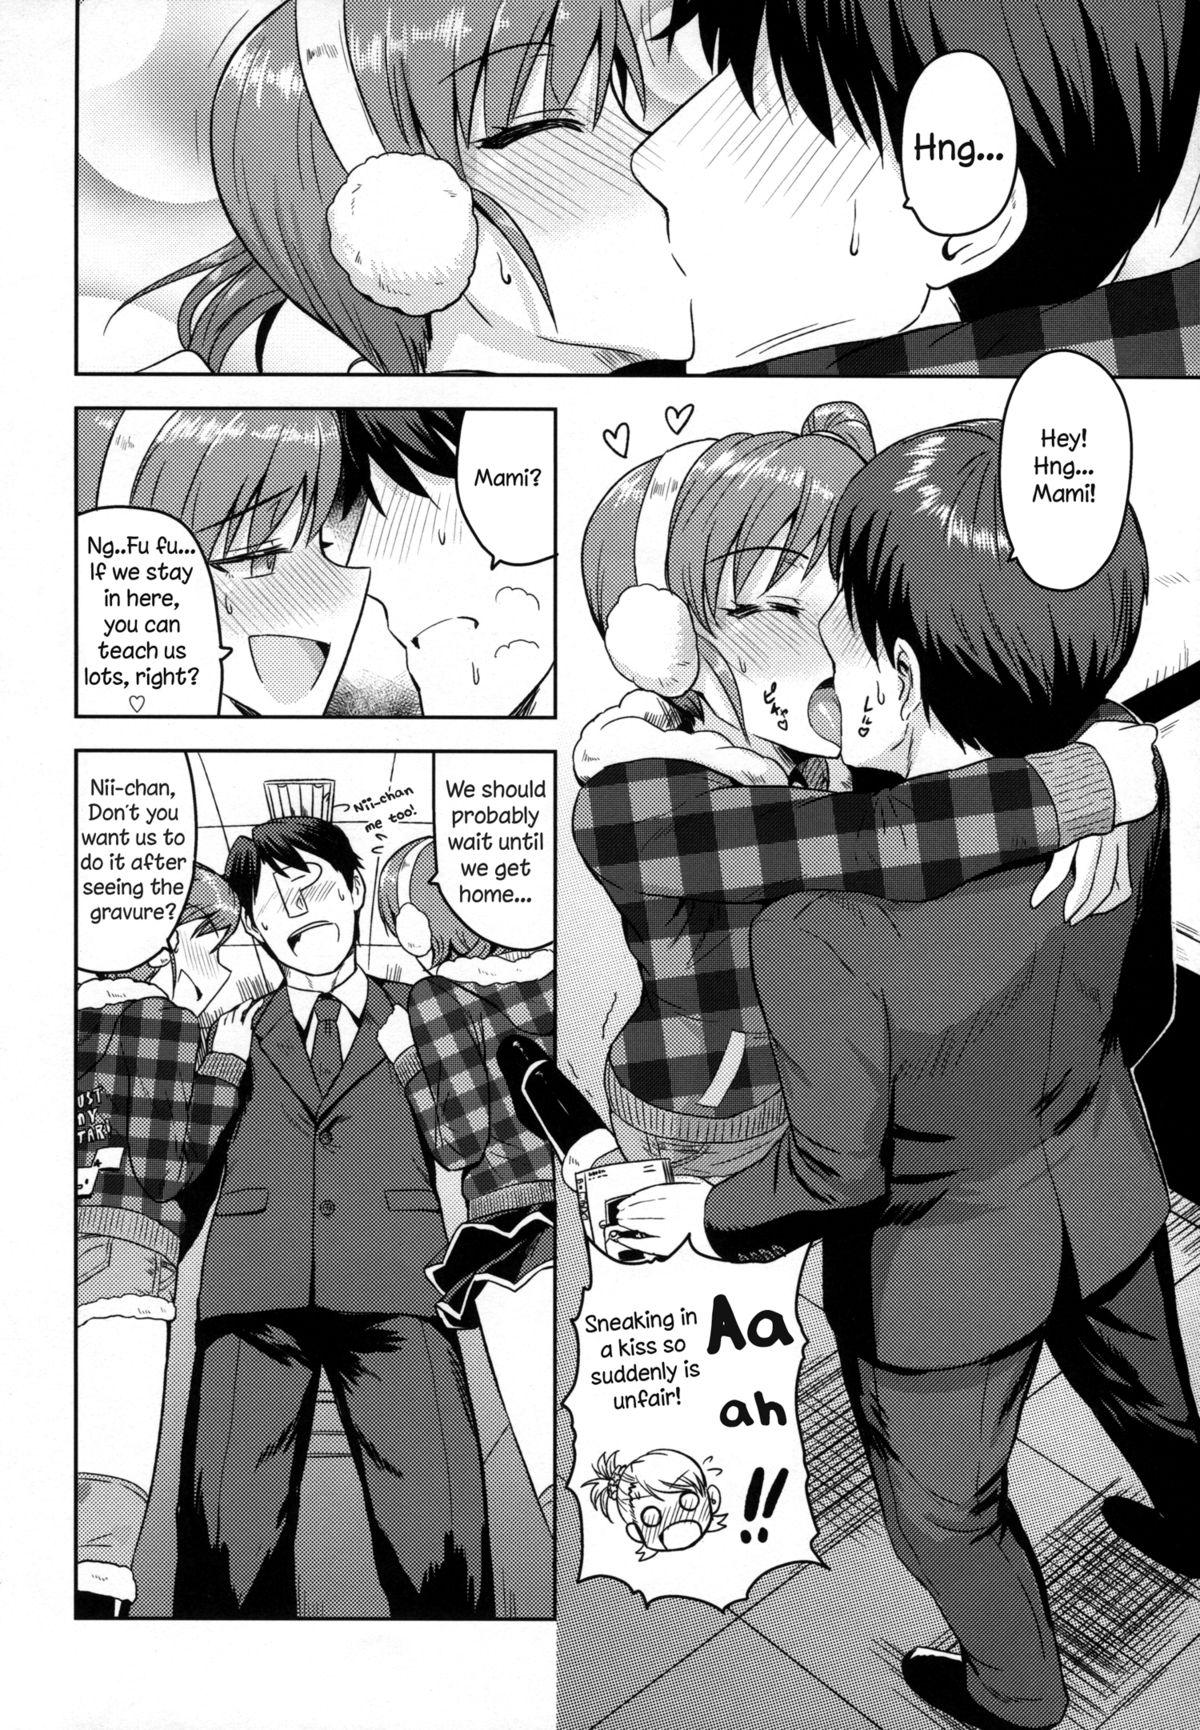 Leche Ami Mami Mind 3 - The idolmaster Hung - Page 5